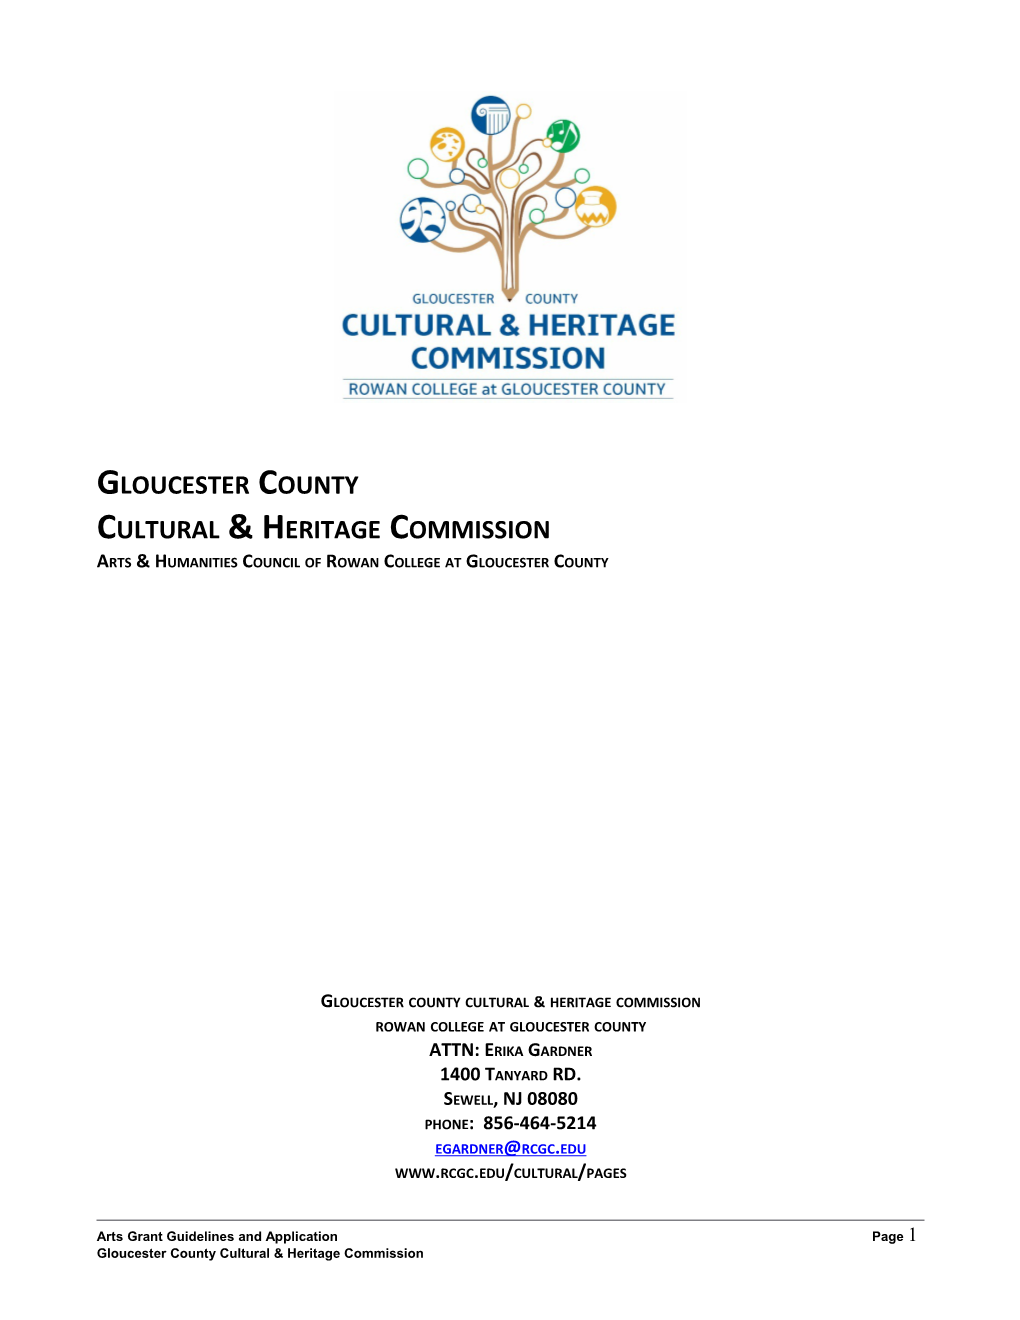 Arts & Humanities Council of Rowan College at Gloucester County